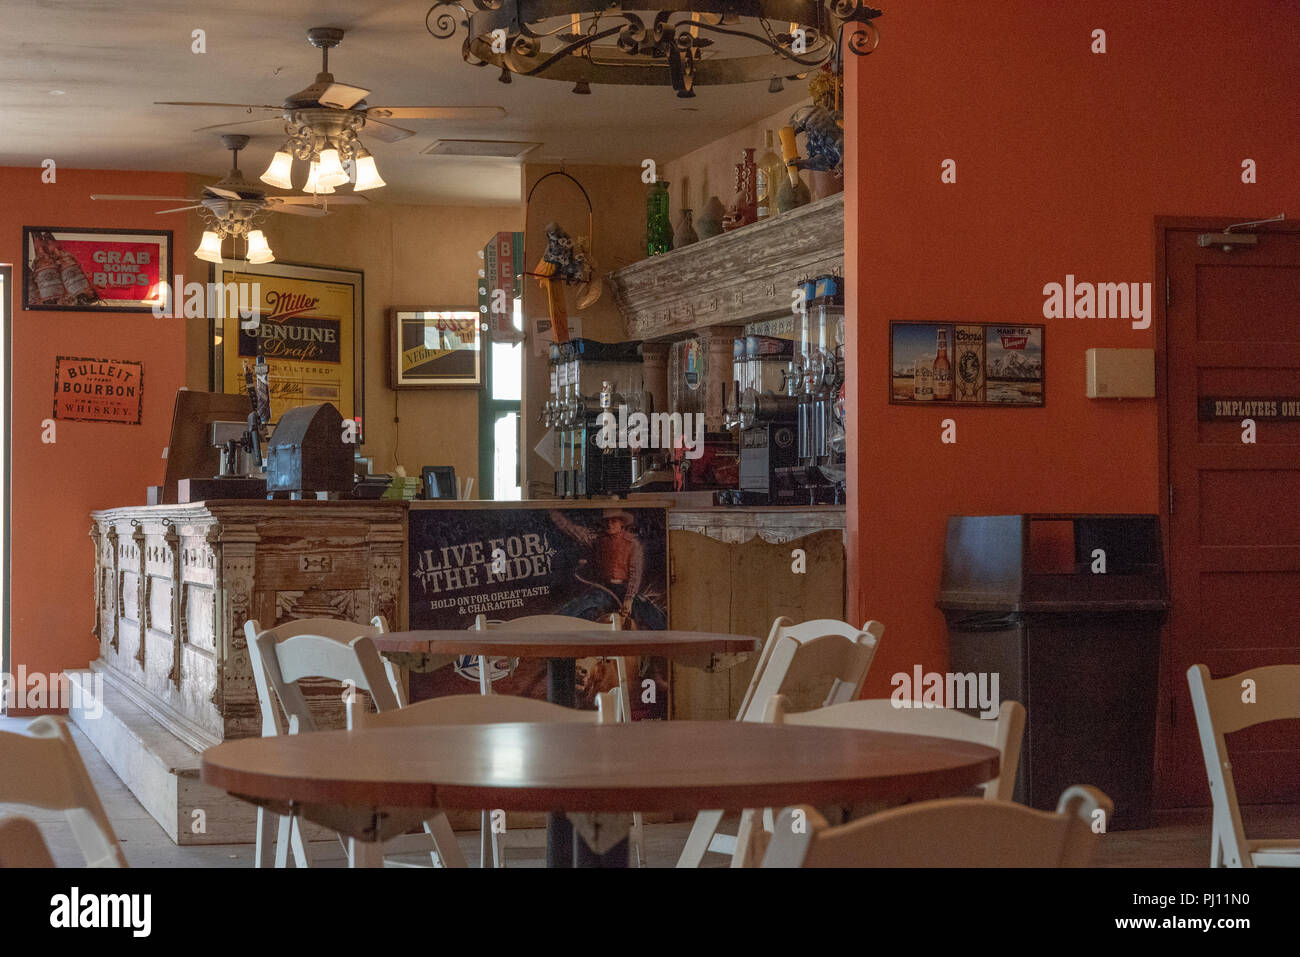 Interior of restaurant bar, round tables and folding chairs.  Wall displays pictures and posters of western movies. Stock Photo